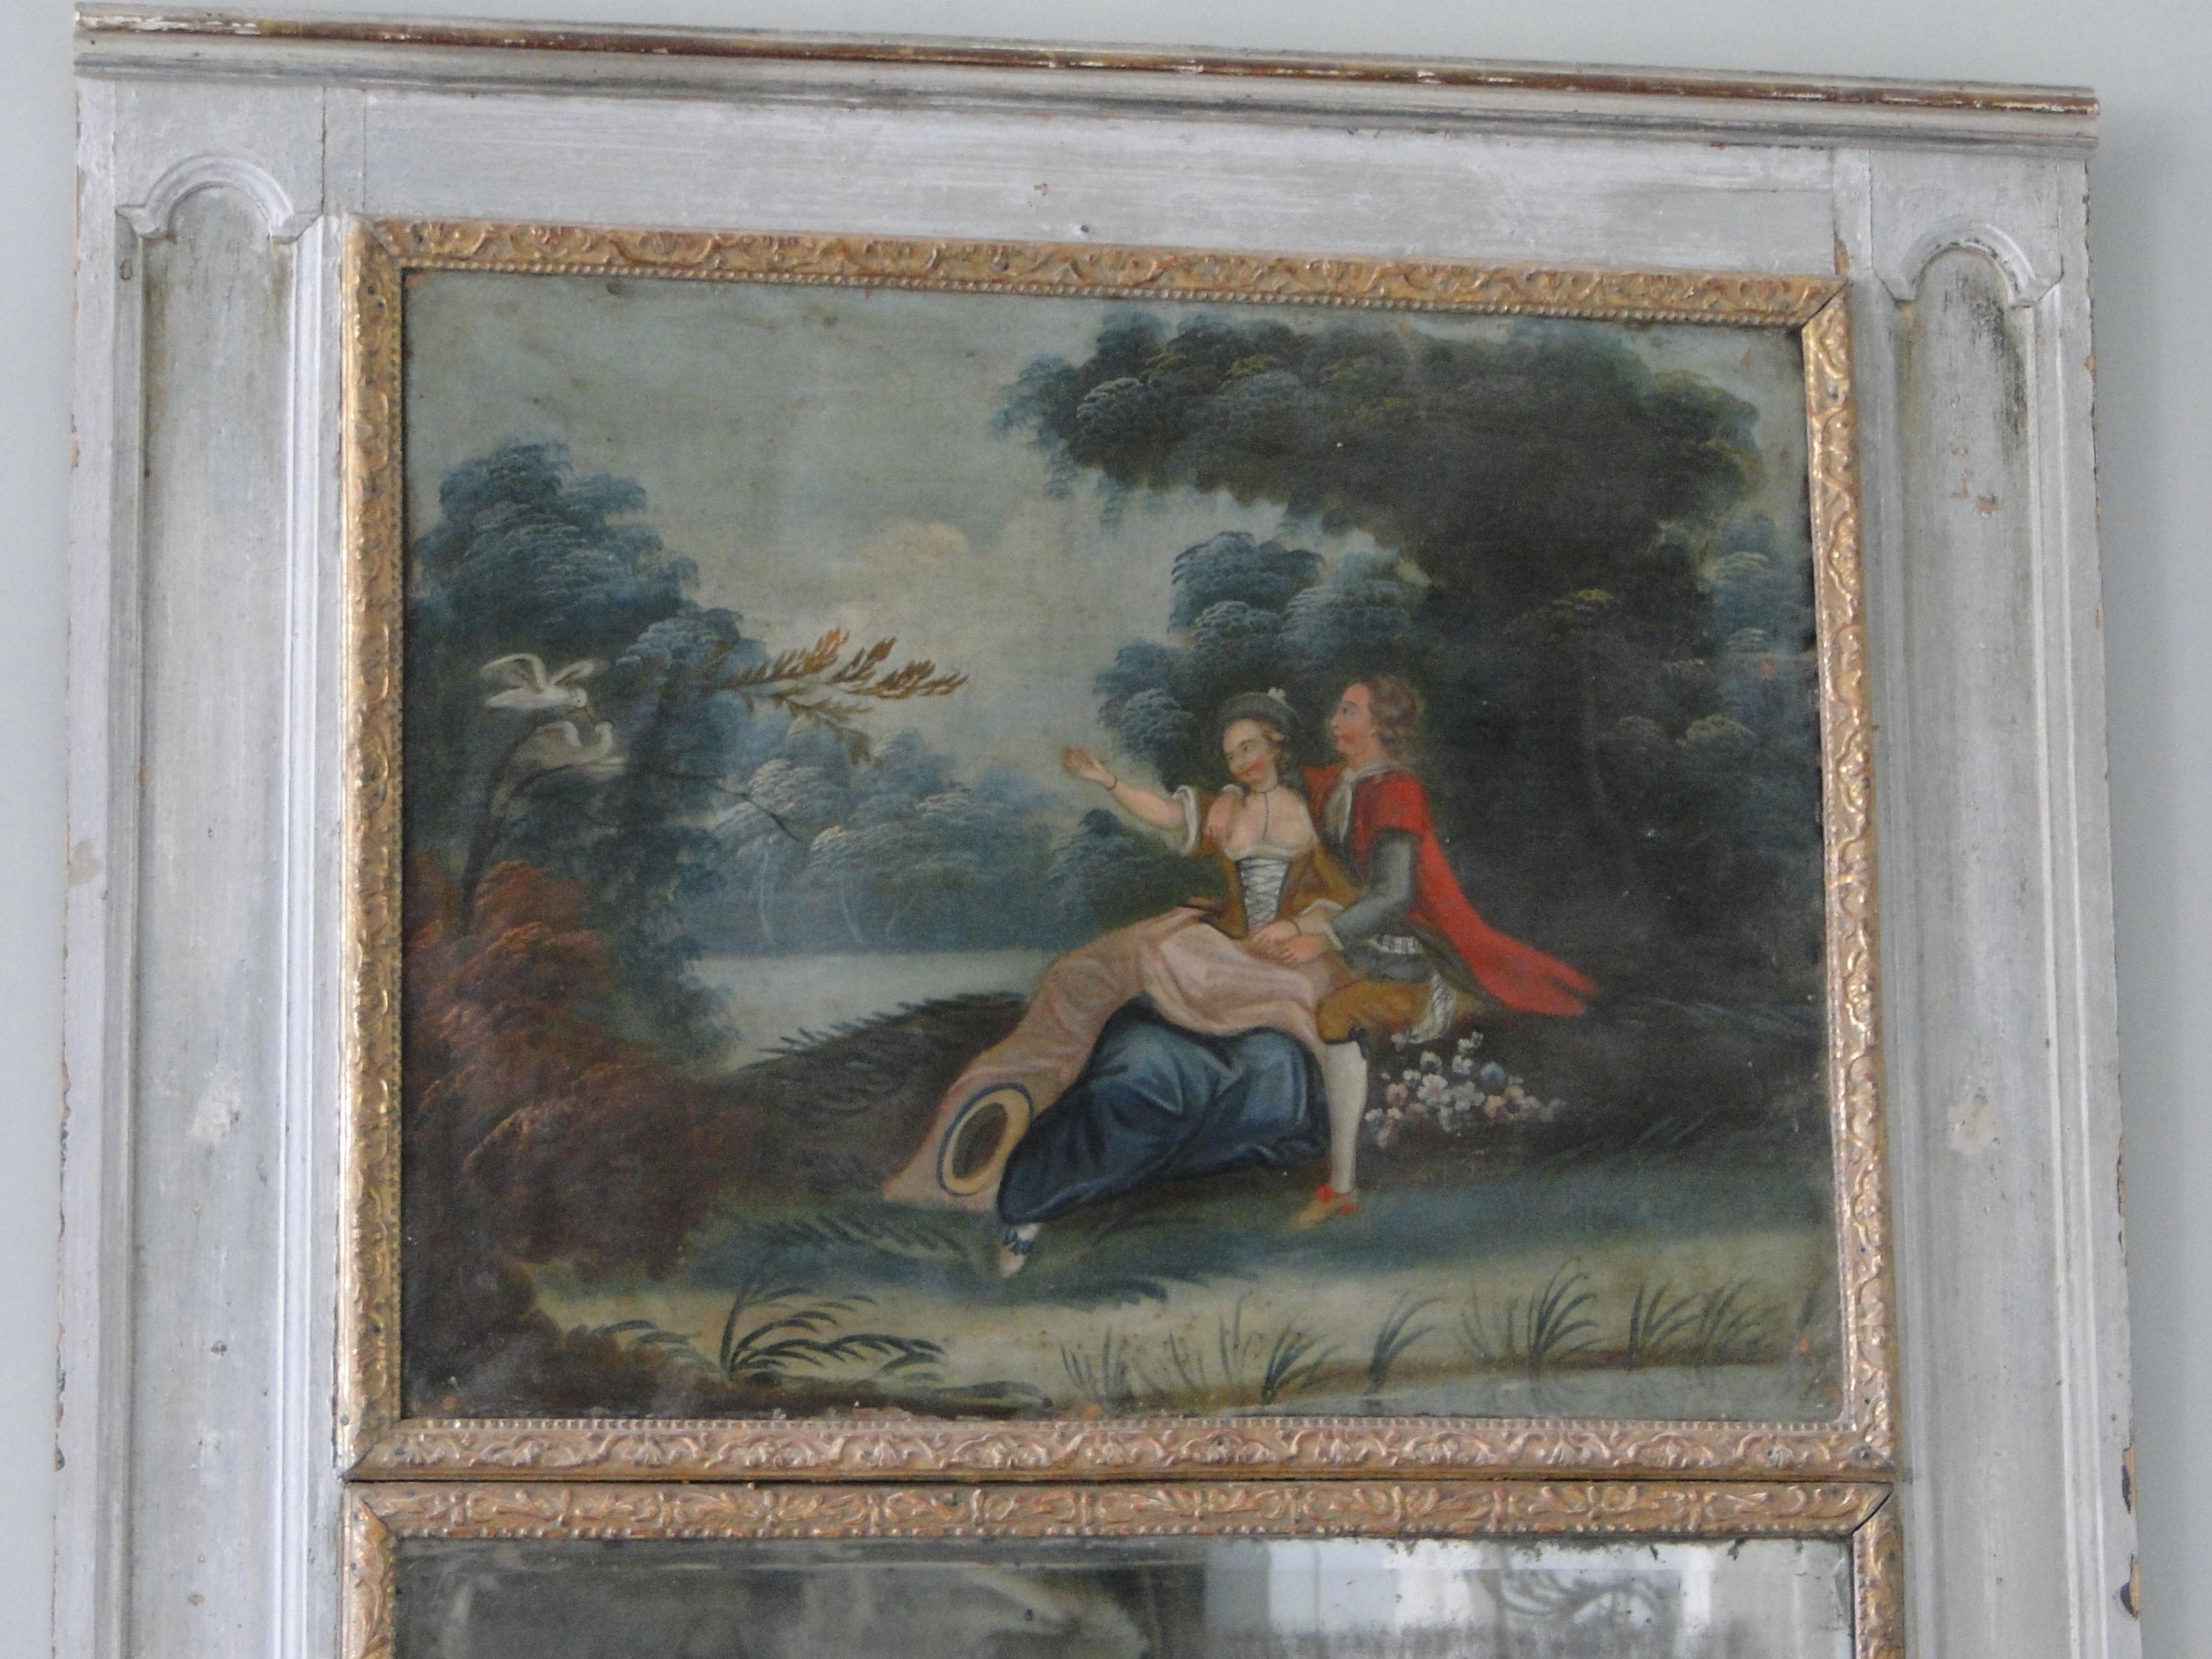 18th century Louis XVI trumeau, mirror retains the original glass and woodbacking as well as the romantic oil painted scene on canvas. The original crochets are visible on the back.